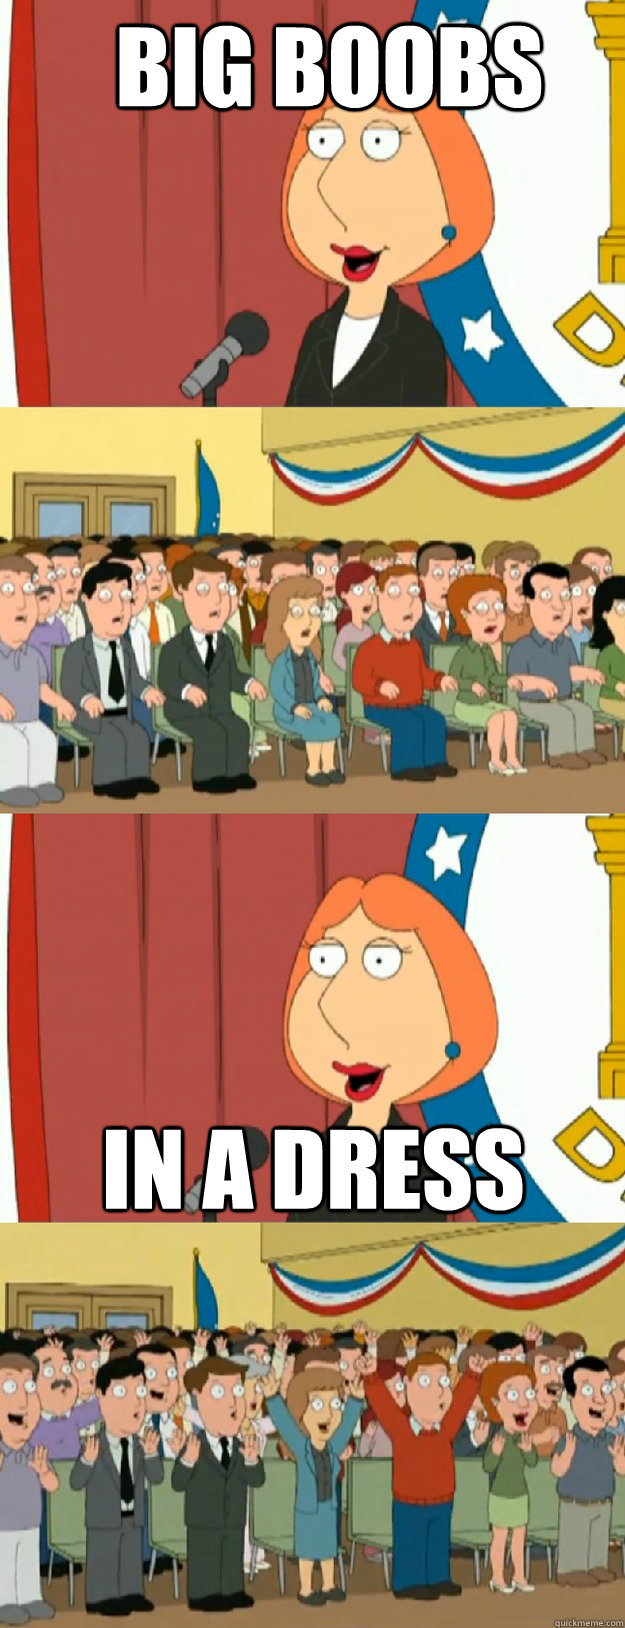 Big boobs in a dress  Lois Griffin